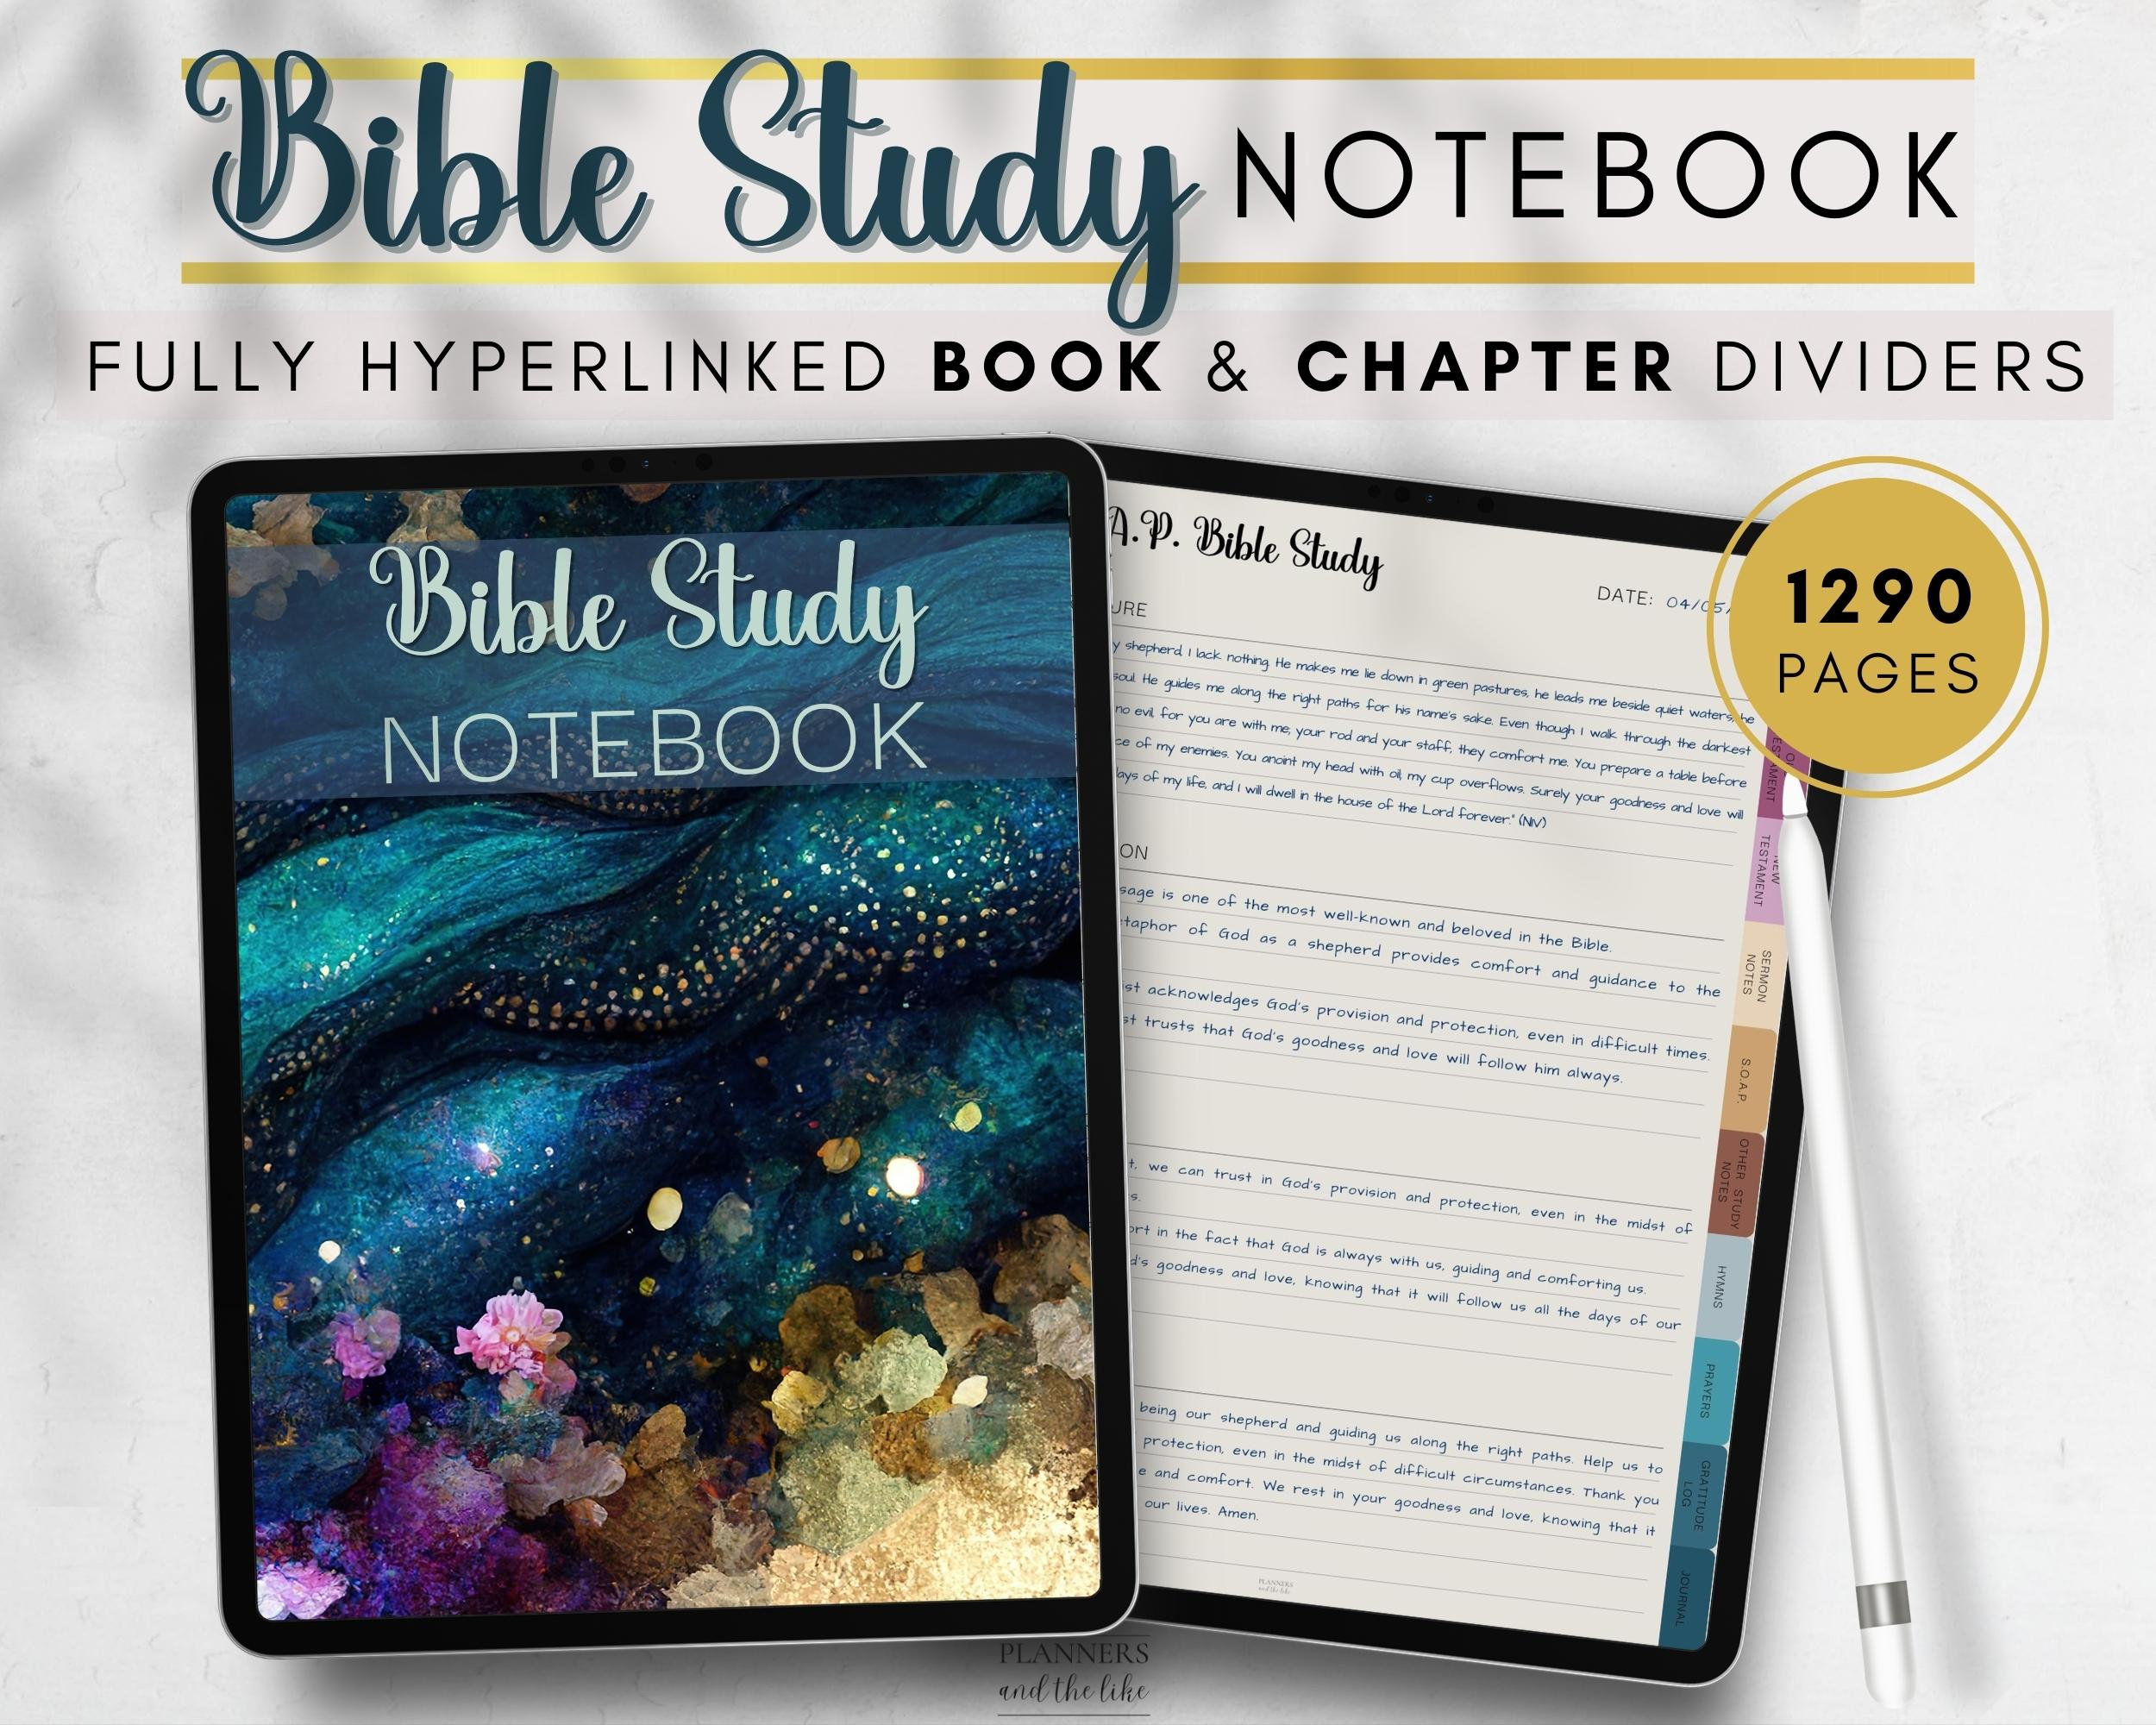 Bible Study Journal: Scripture Notes Bible Study Notebook – A Notebook For  Recording Scripture And Sermon Notes, Weekly Prayer List Notebook – Bible  Journaling Kit For Women on Galleon Philippines